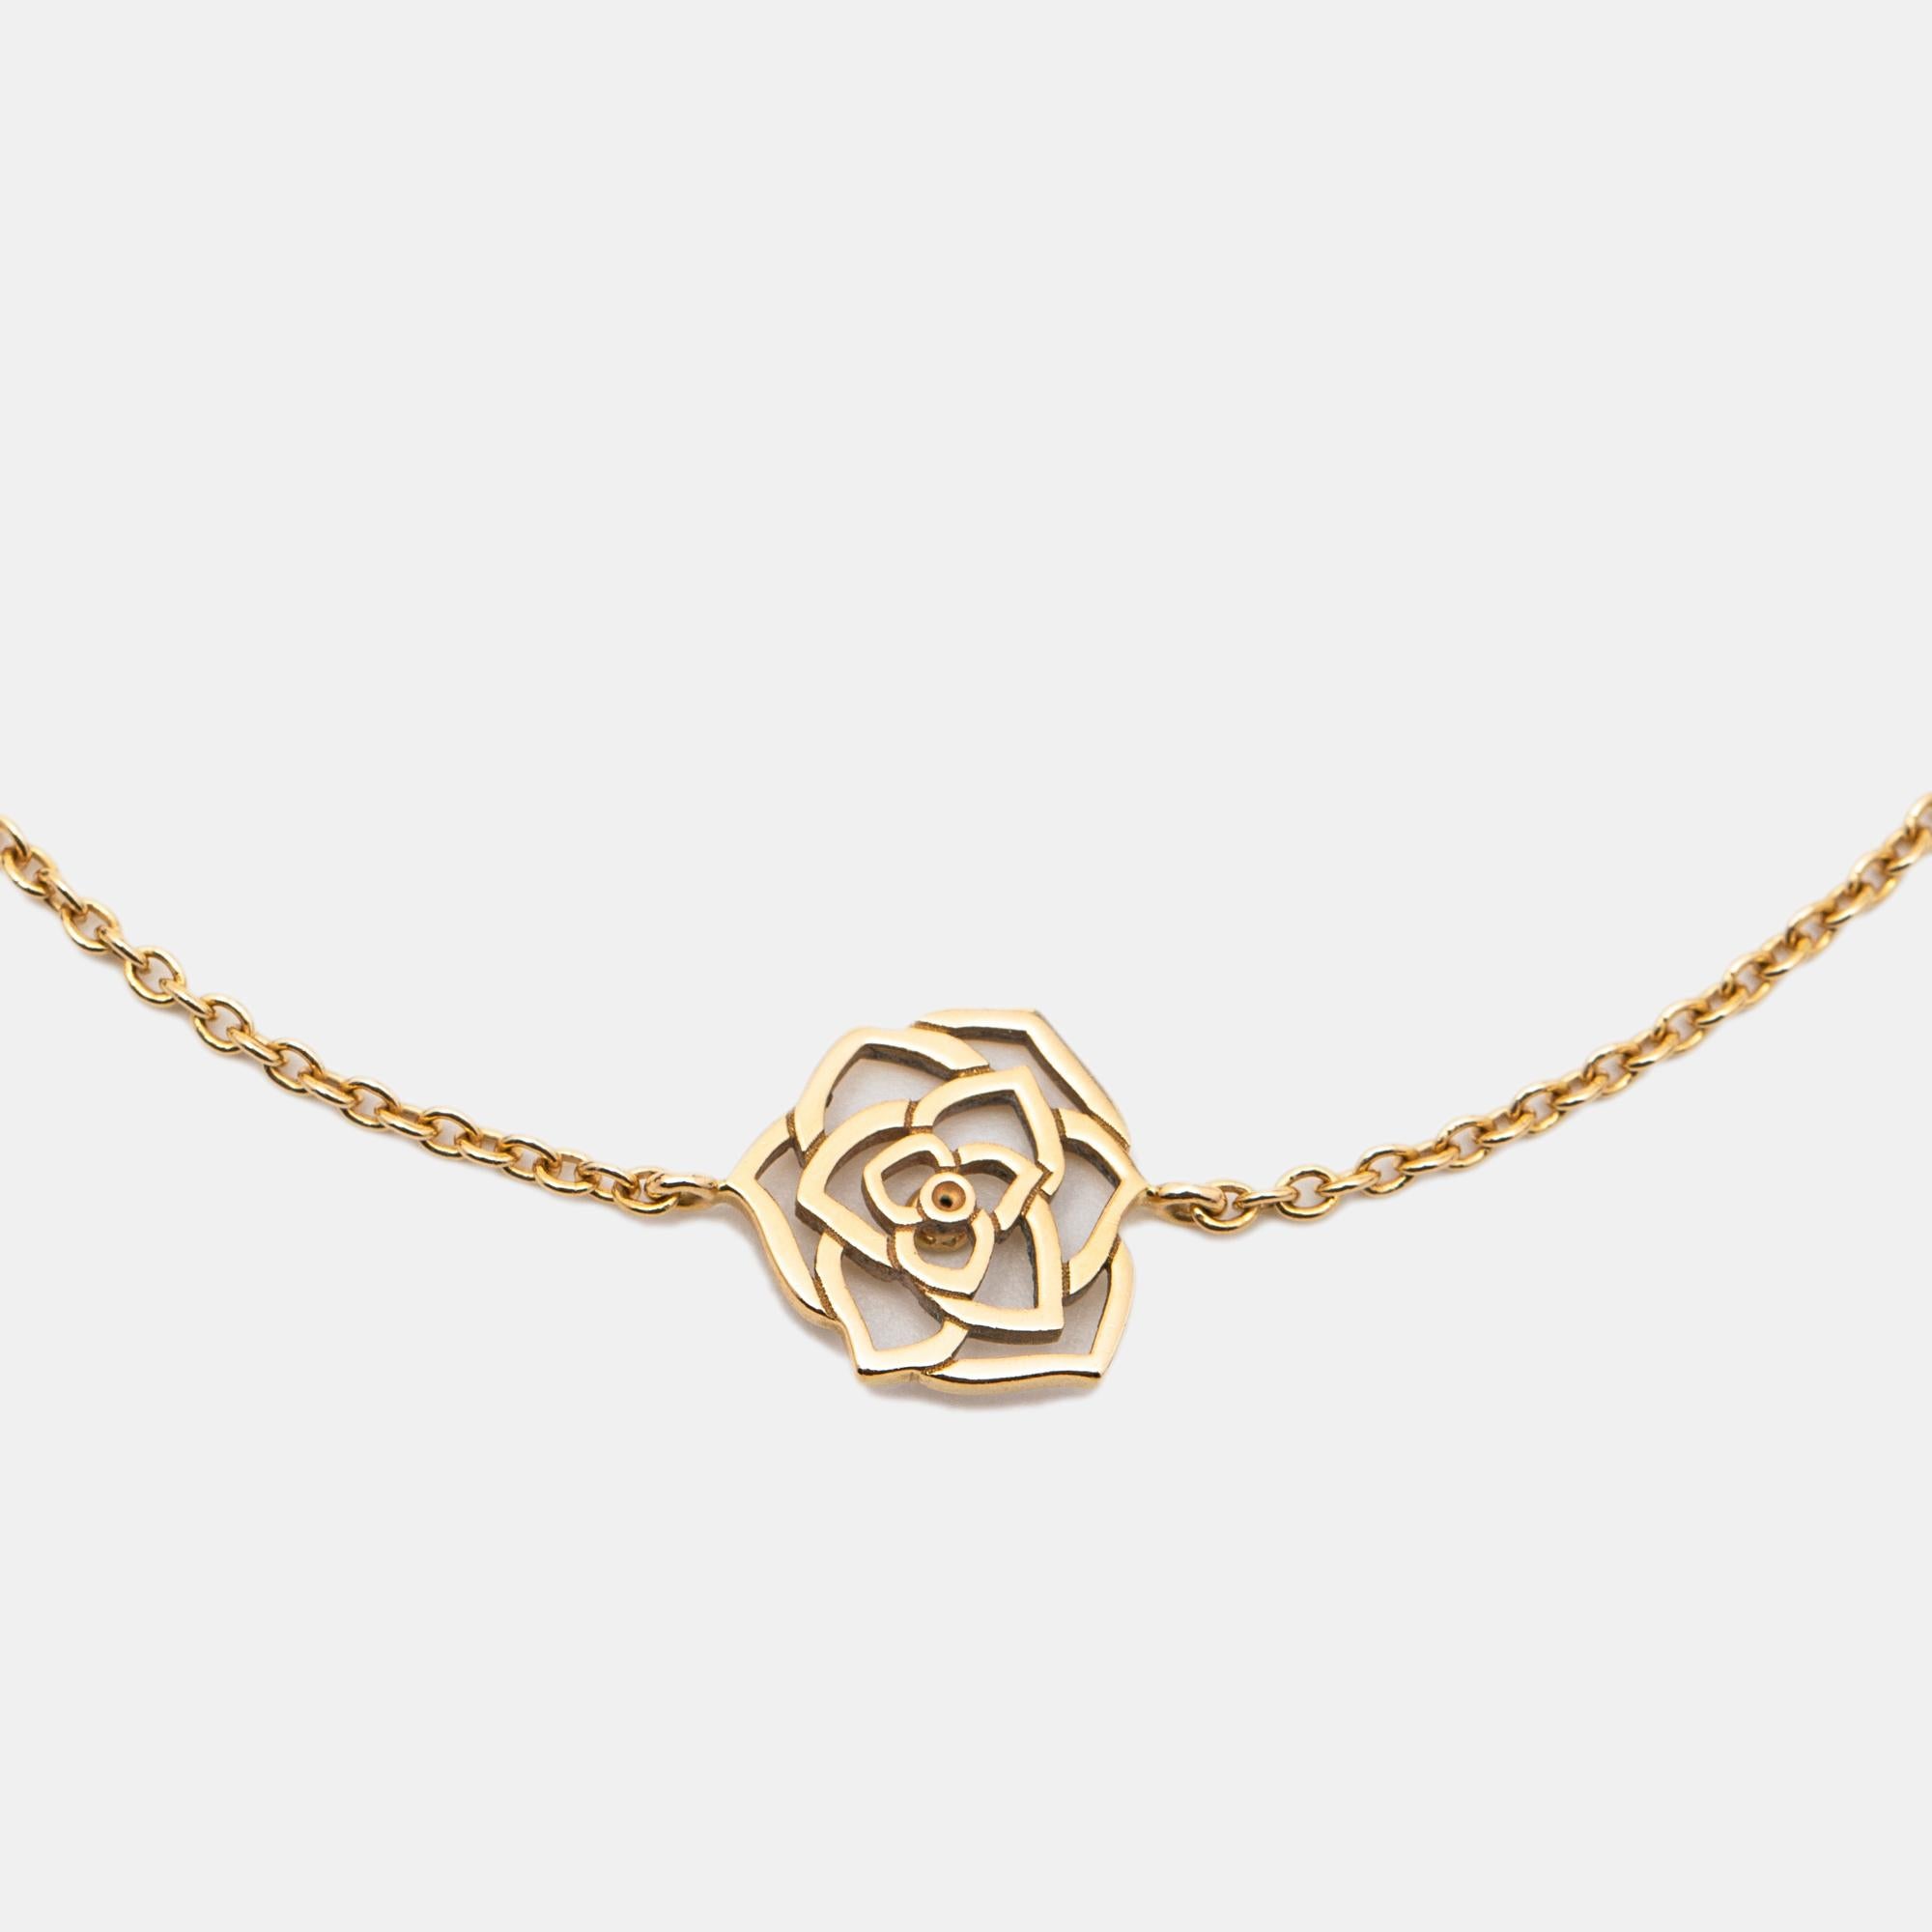 Piaget's Rose collection celebrates the beauty and essence of a rose, for it is indeed the most romantic of nature's flowers. This exquisite bracelet embodies that essence and is beautifully set in 18K rose gold. A stunning rose with its petals cut